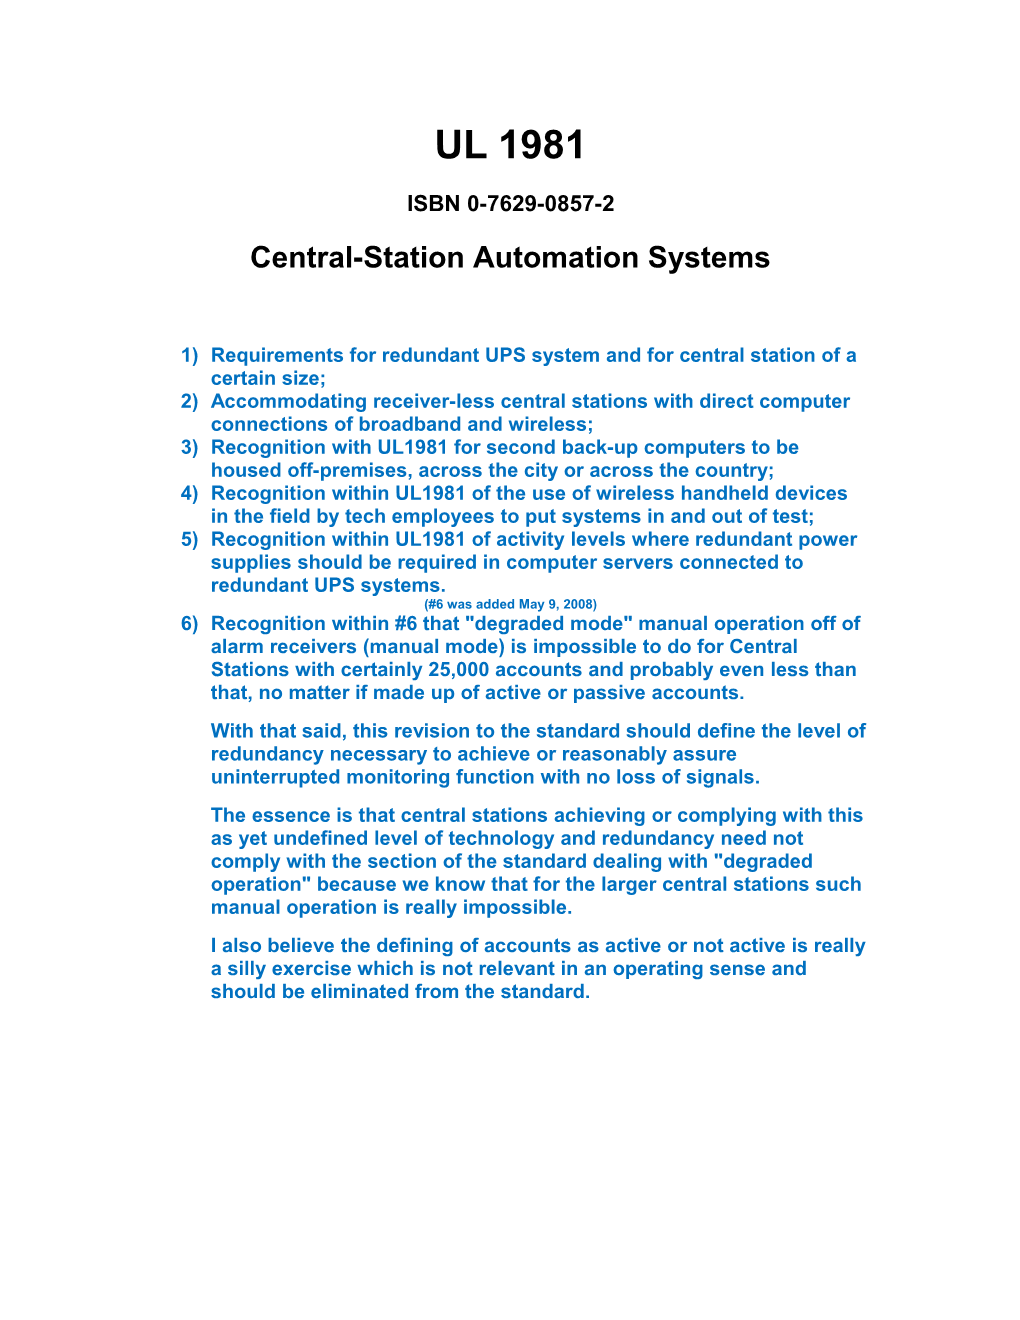 Central-Station Automation Systems